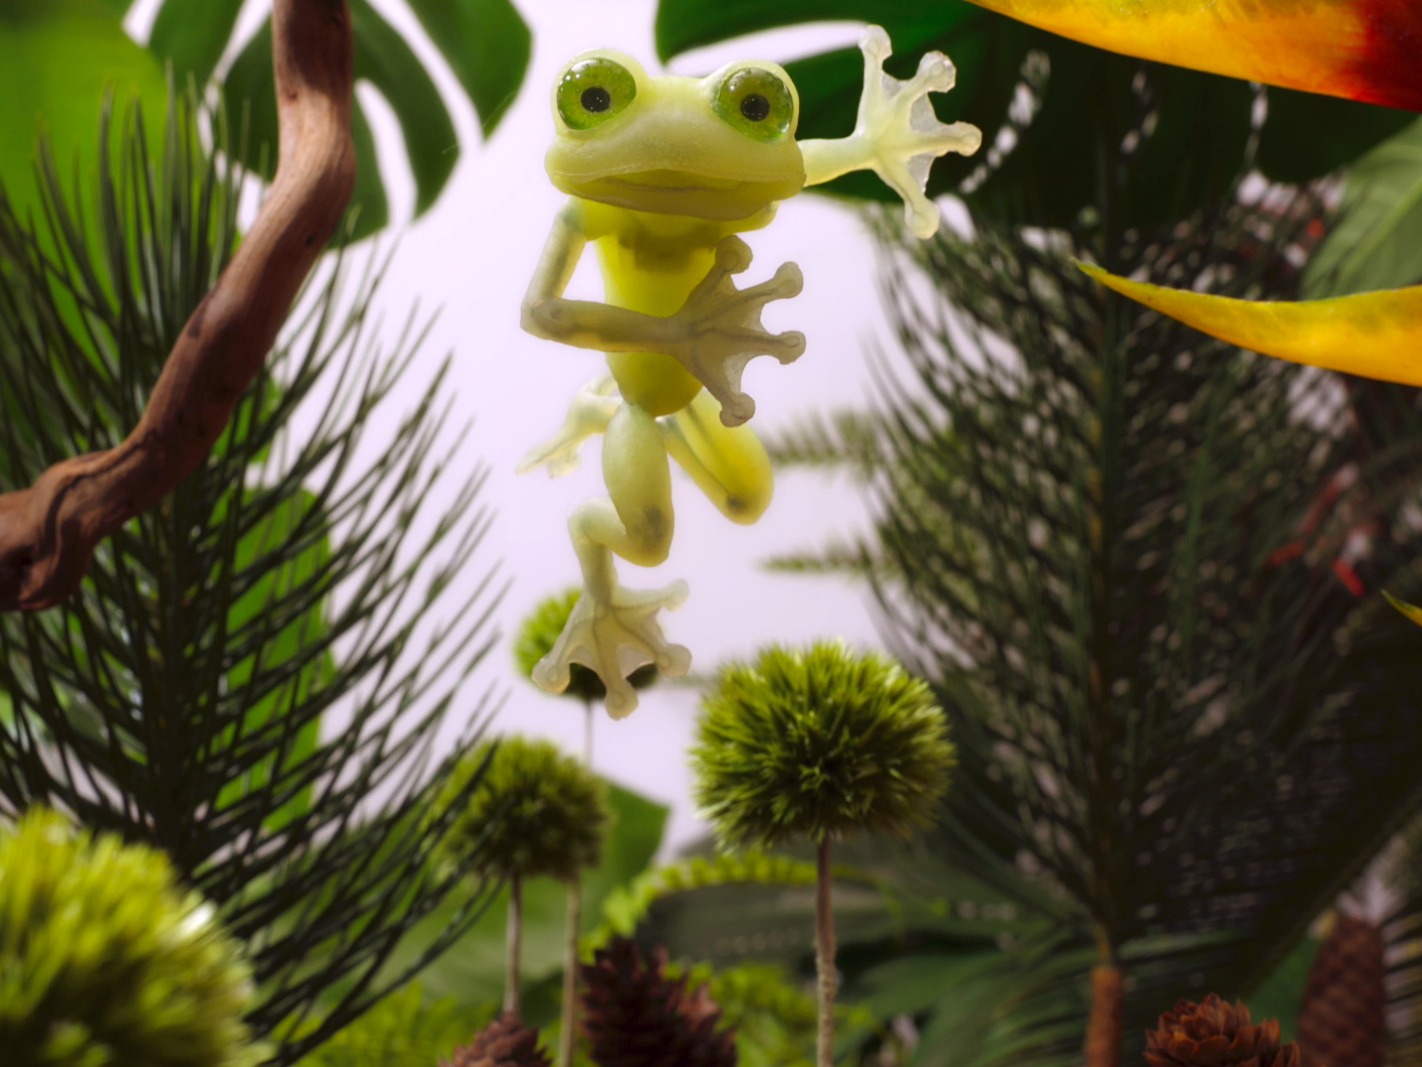 Animated Frogs Jumping